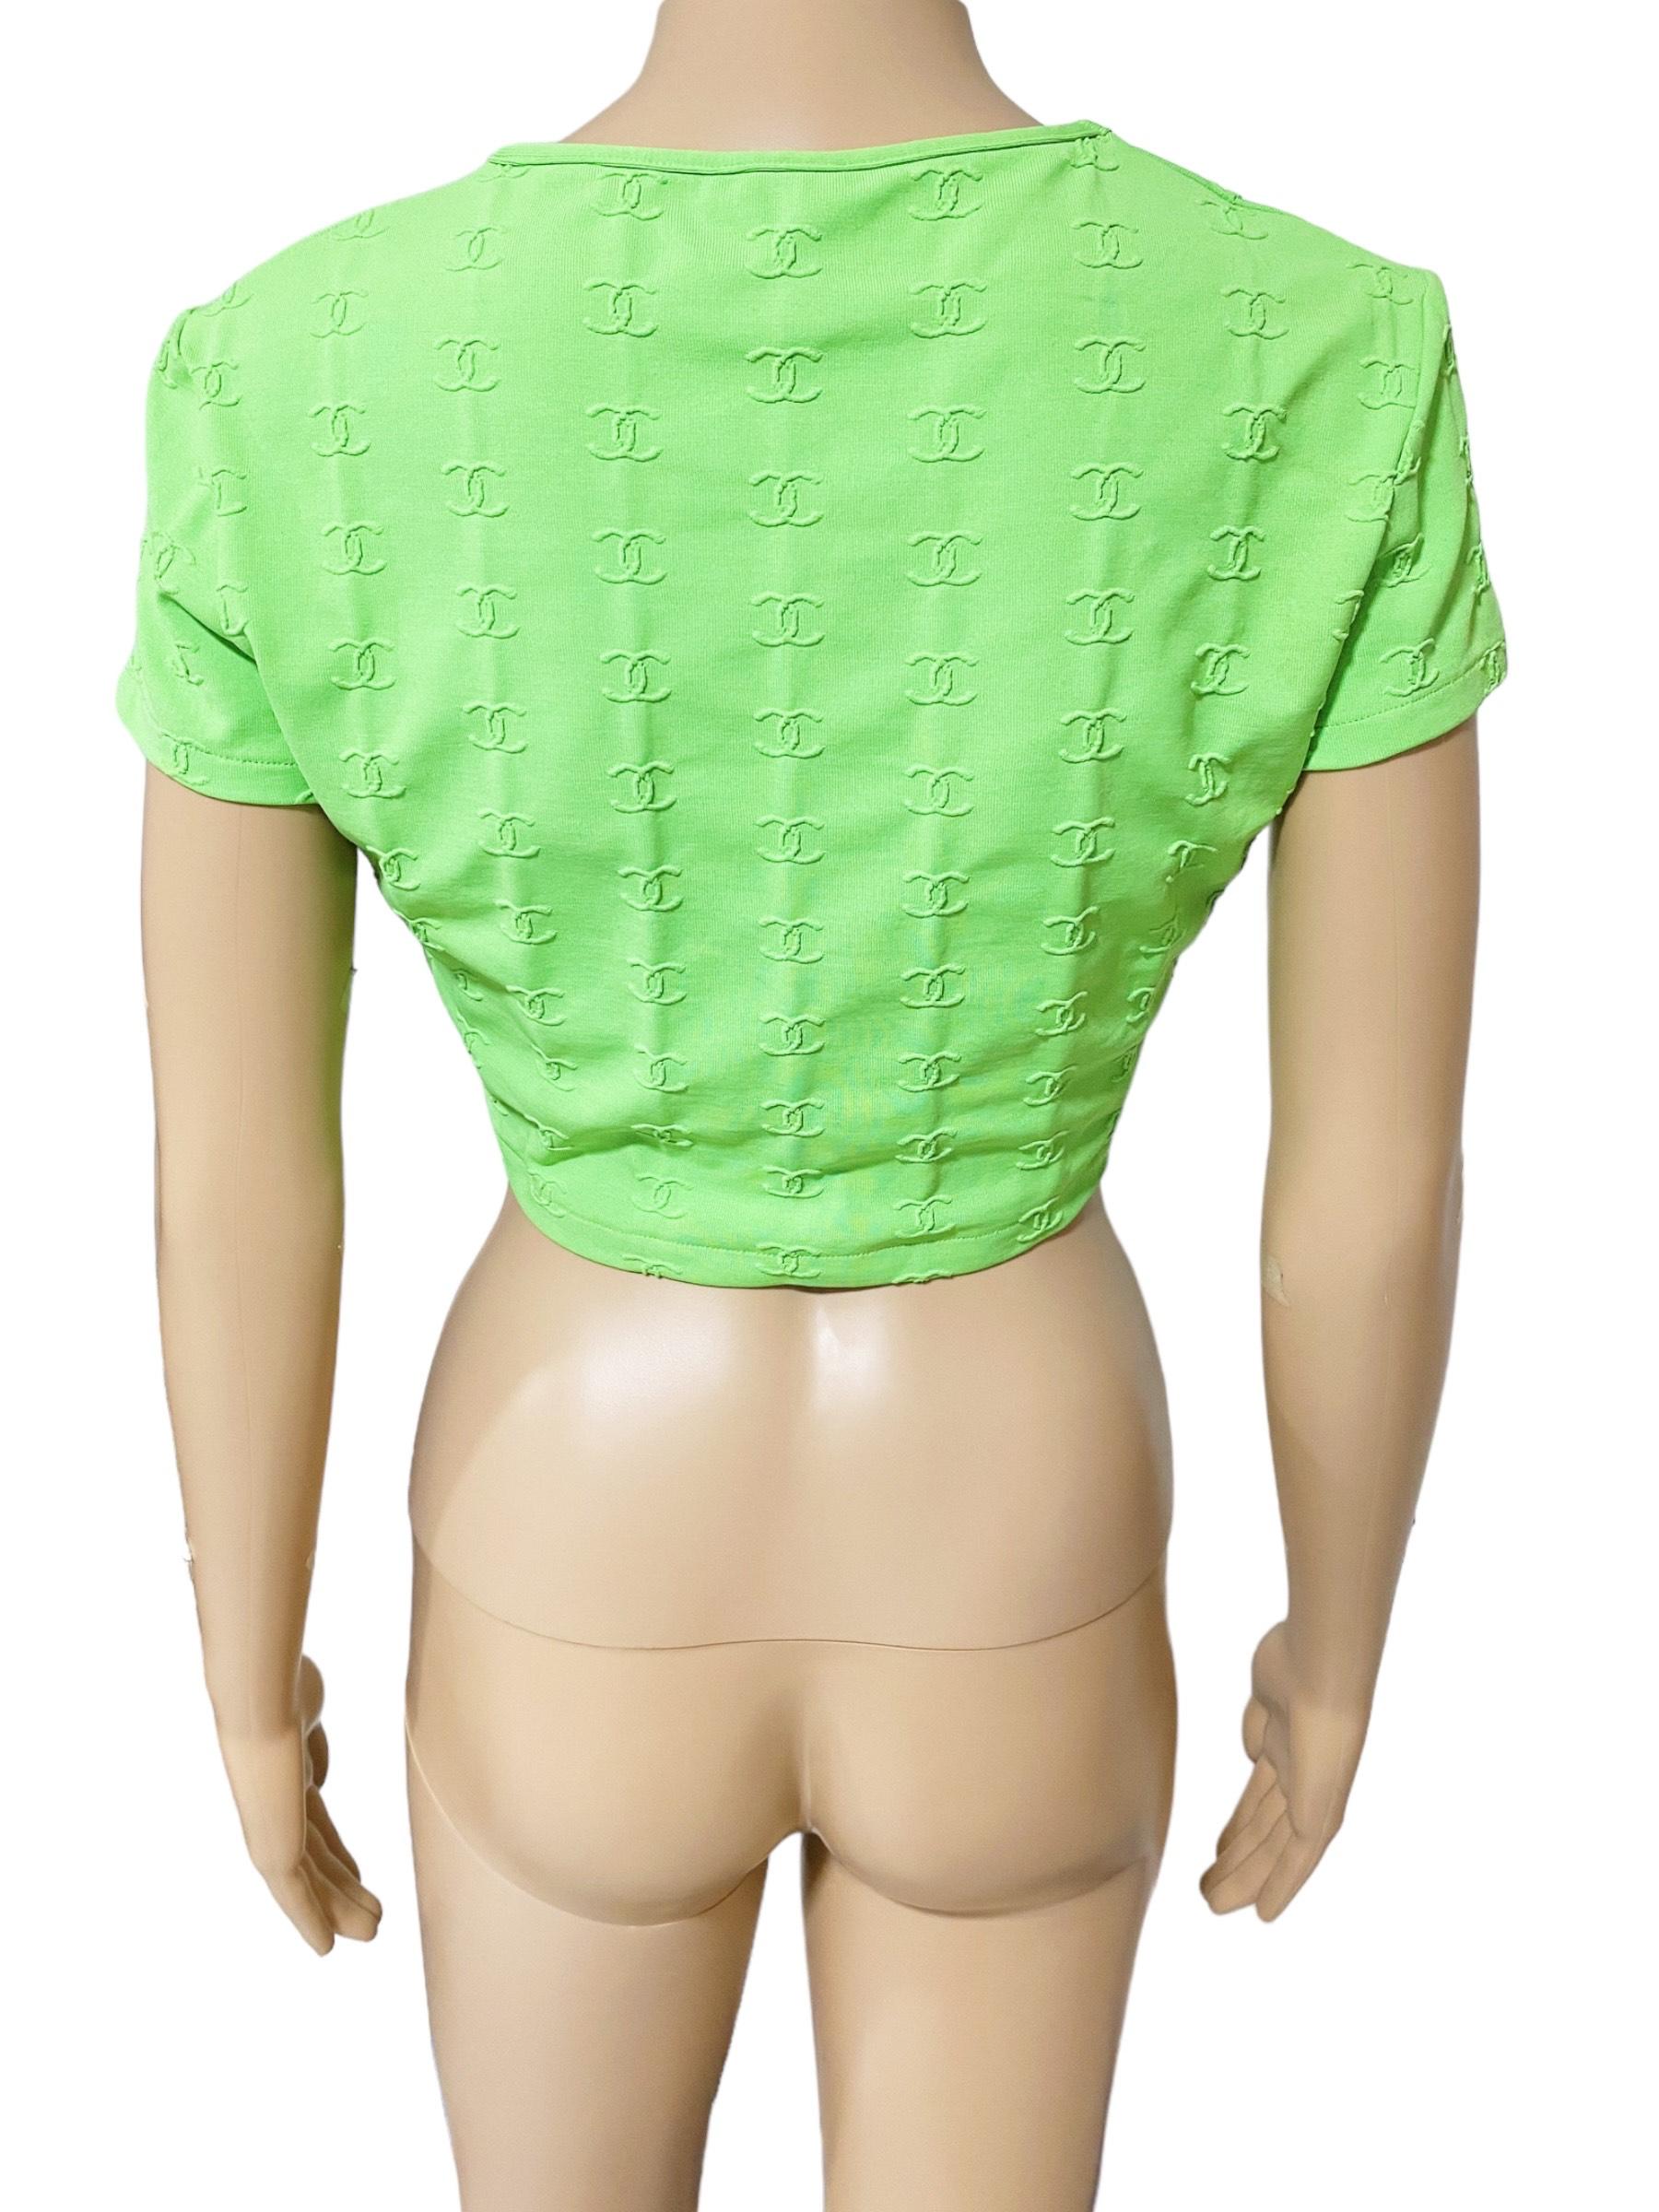 Vintage 90's CHANEL green top In Excellent Condition For Sale In Iba, PH